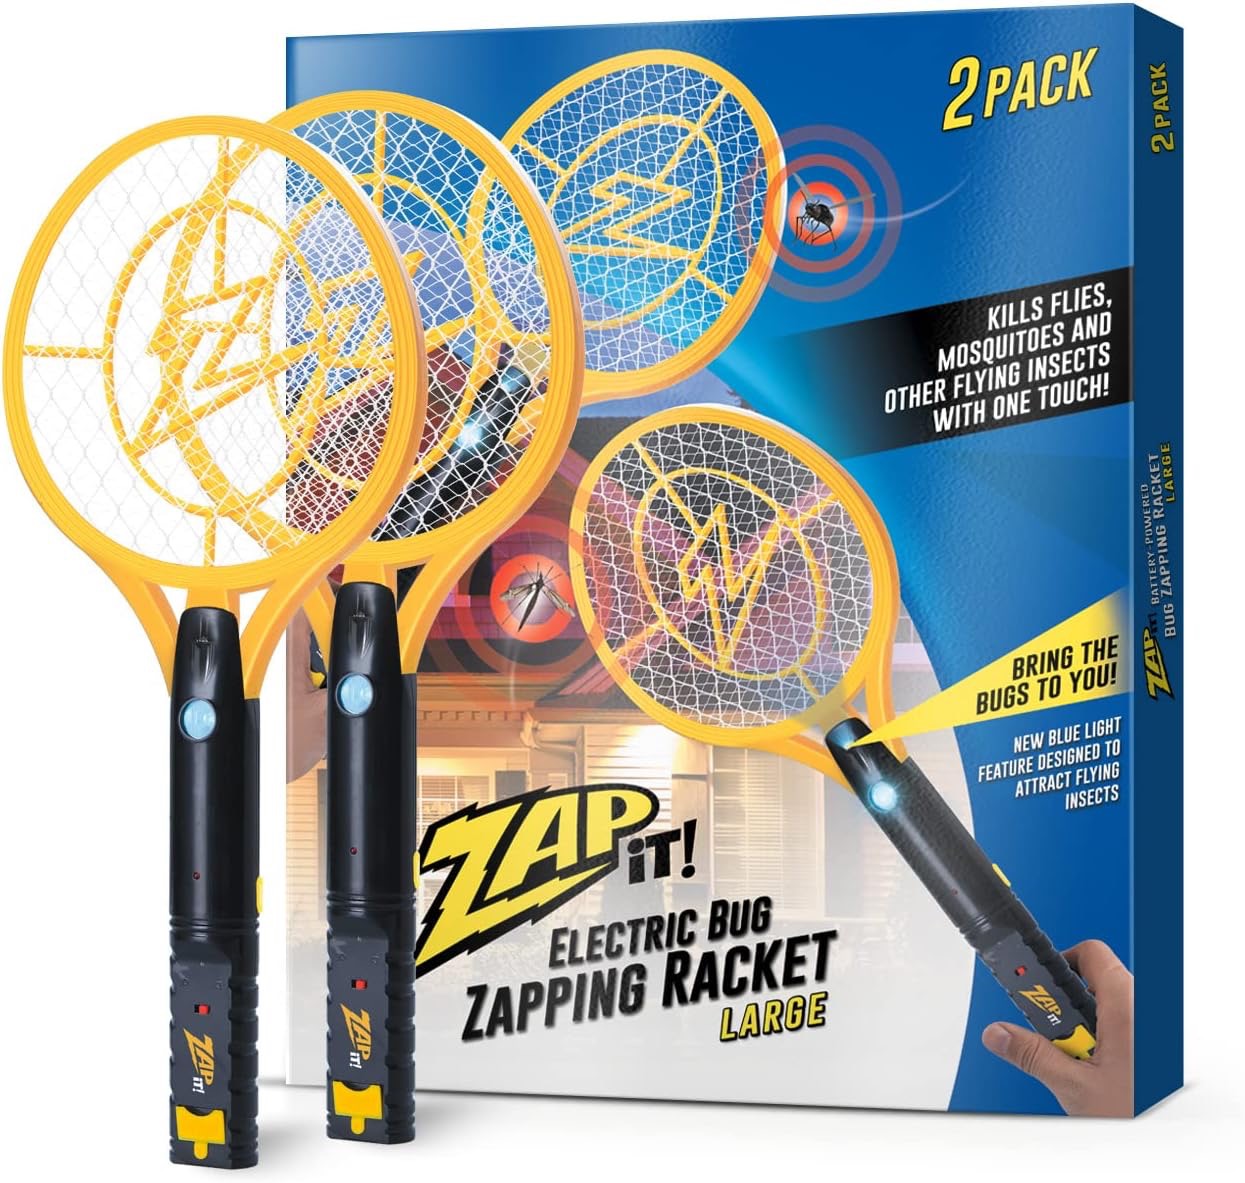 2 Pack Bug Zapper Electric Rechargeable Racket Large - Zap iT